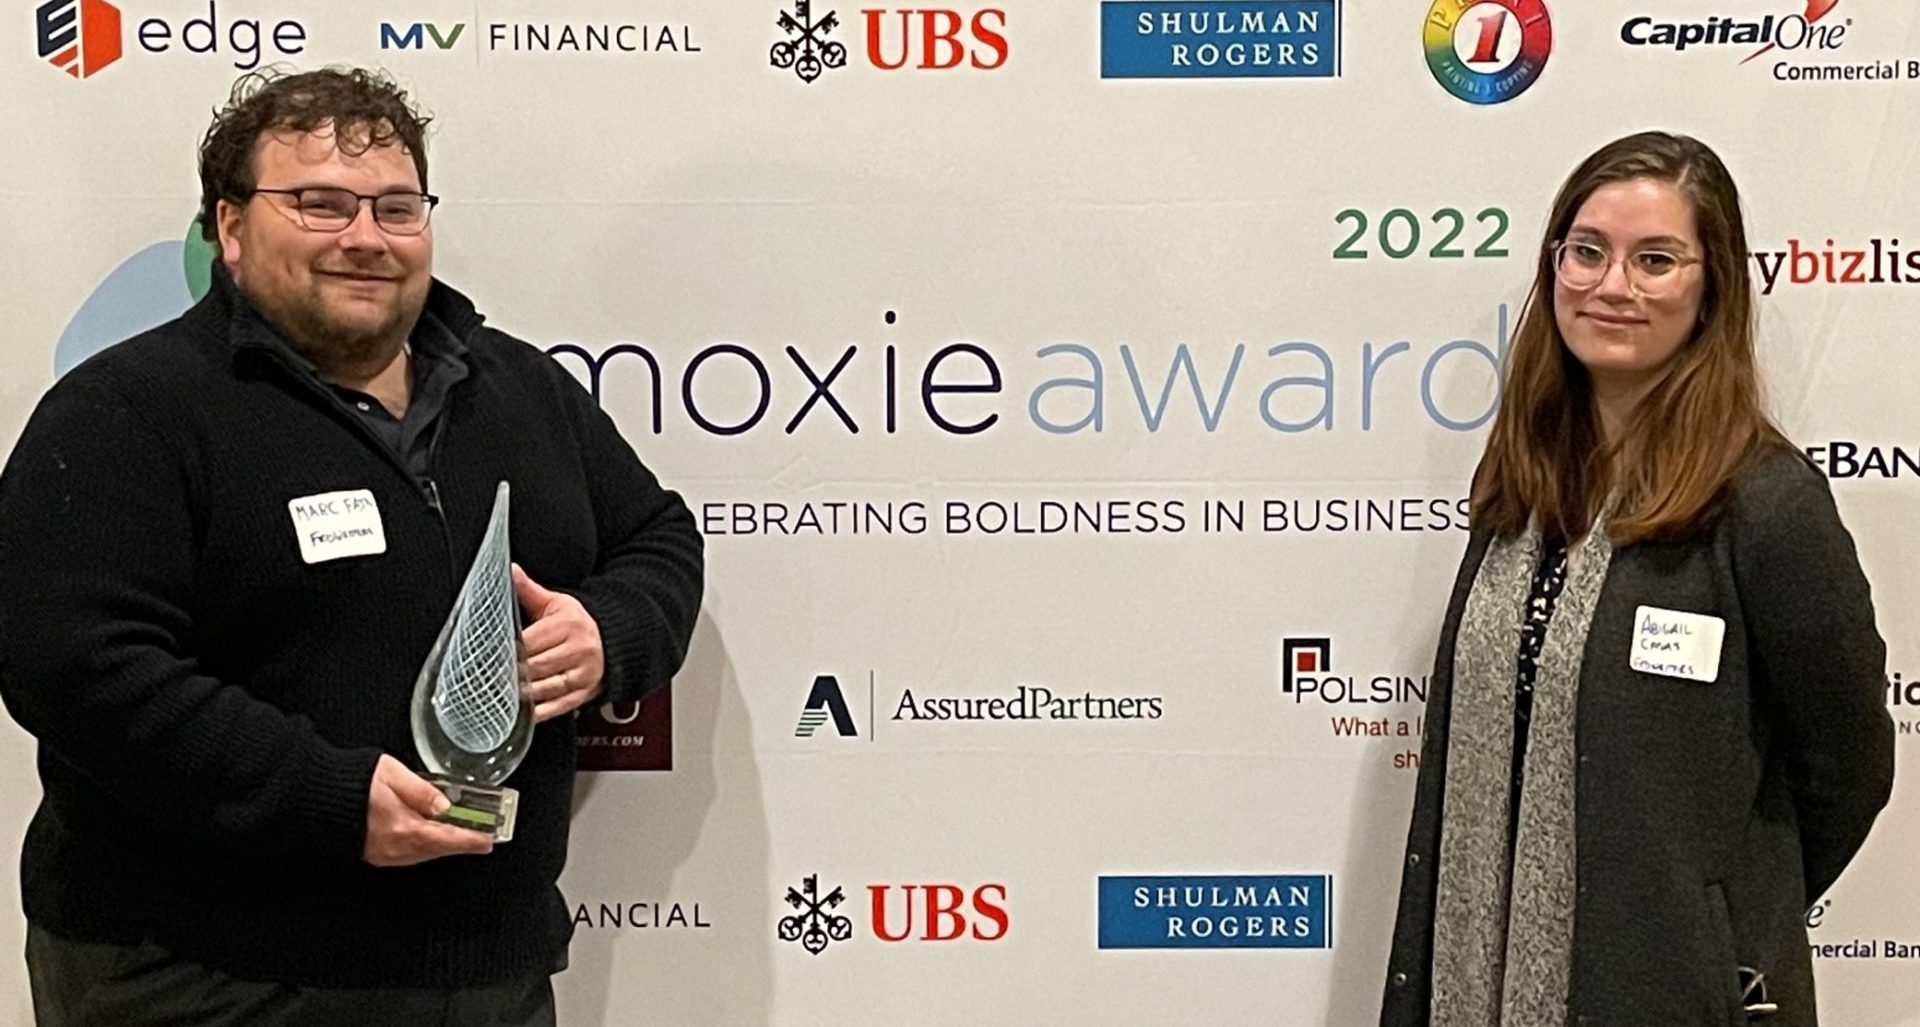 Marc Fain, holding a glass trophy, and Abigail Casas at the 2022 Moxie Awards, Celebrating Boldness in Business.